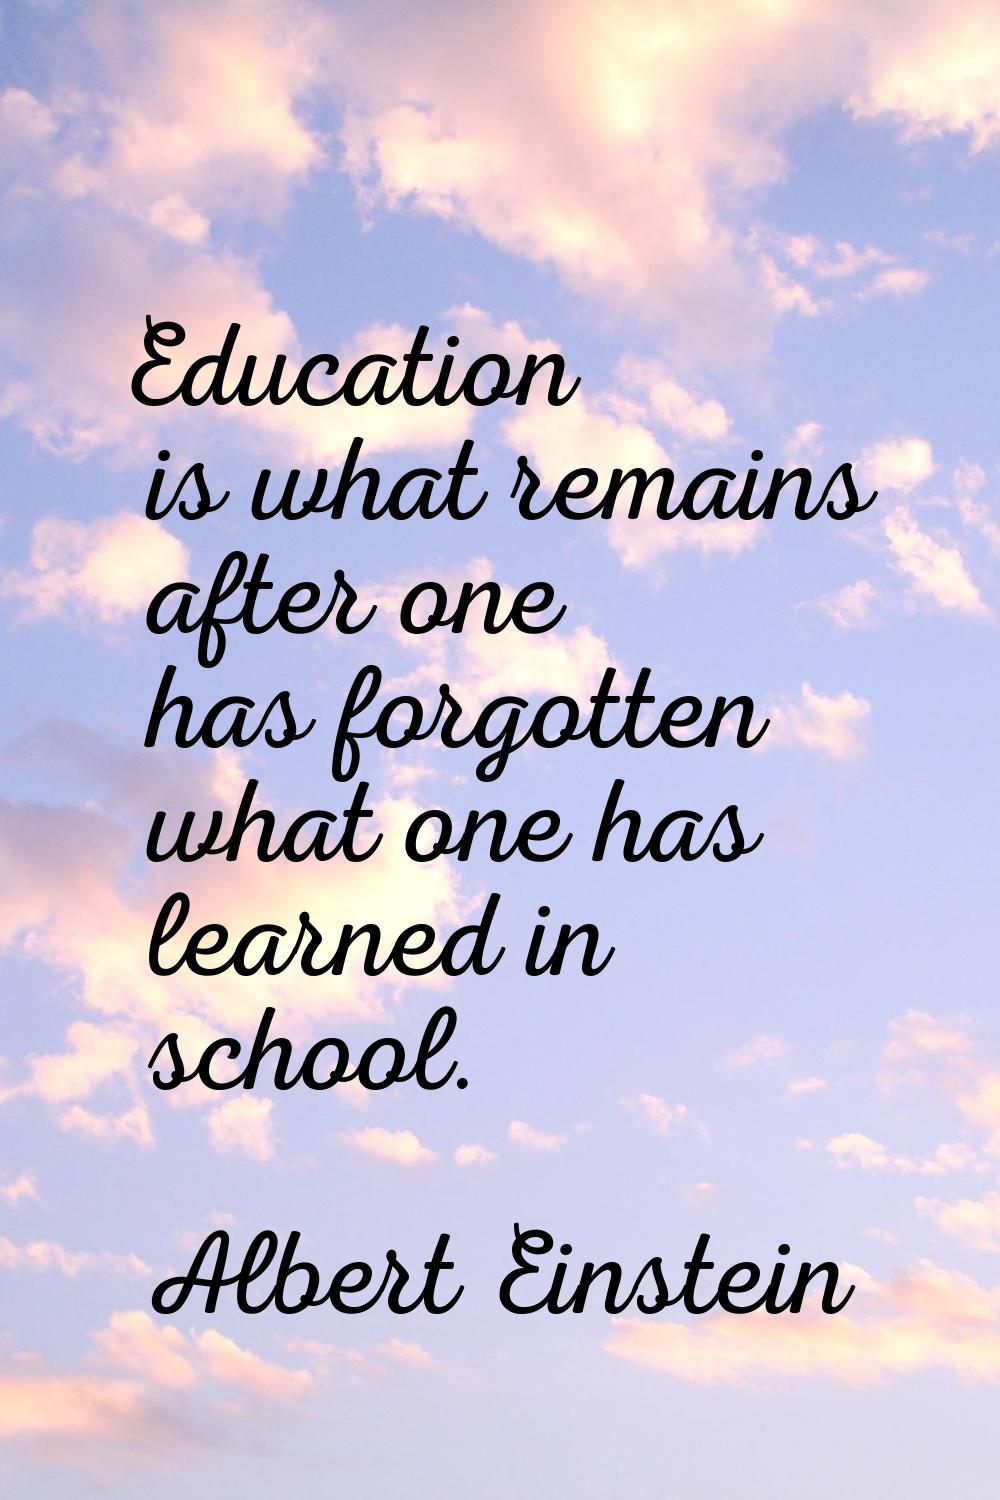 Education is what remains after one has forgotten what one has learned in school.